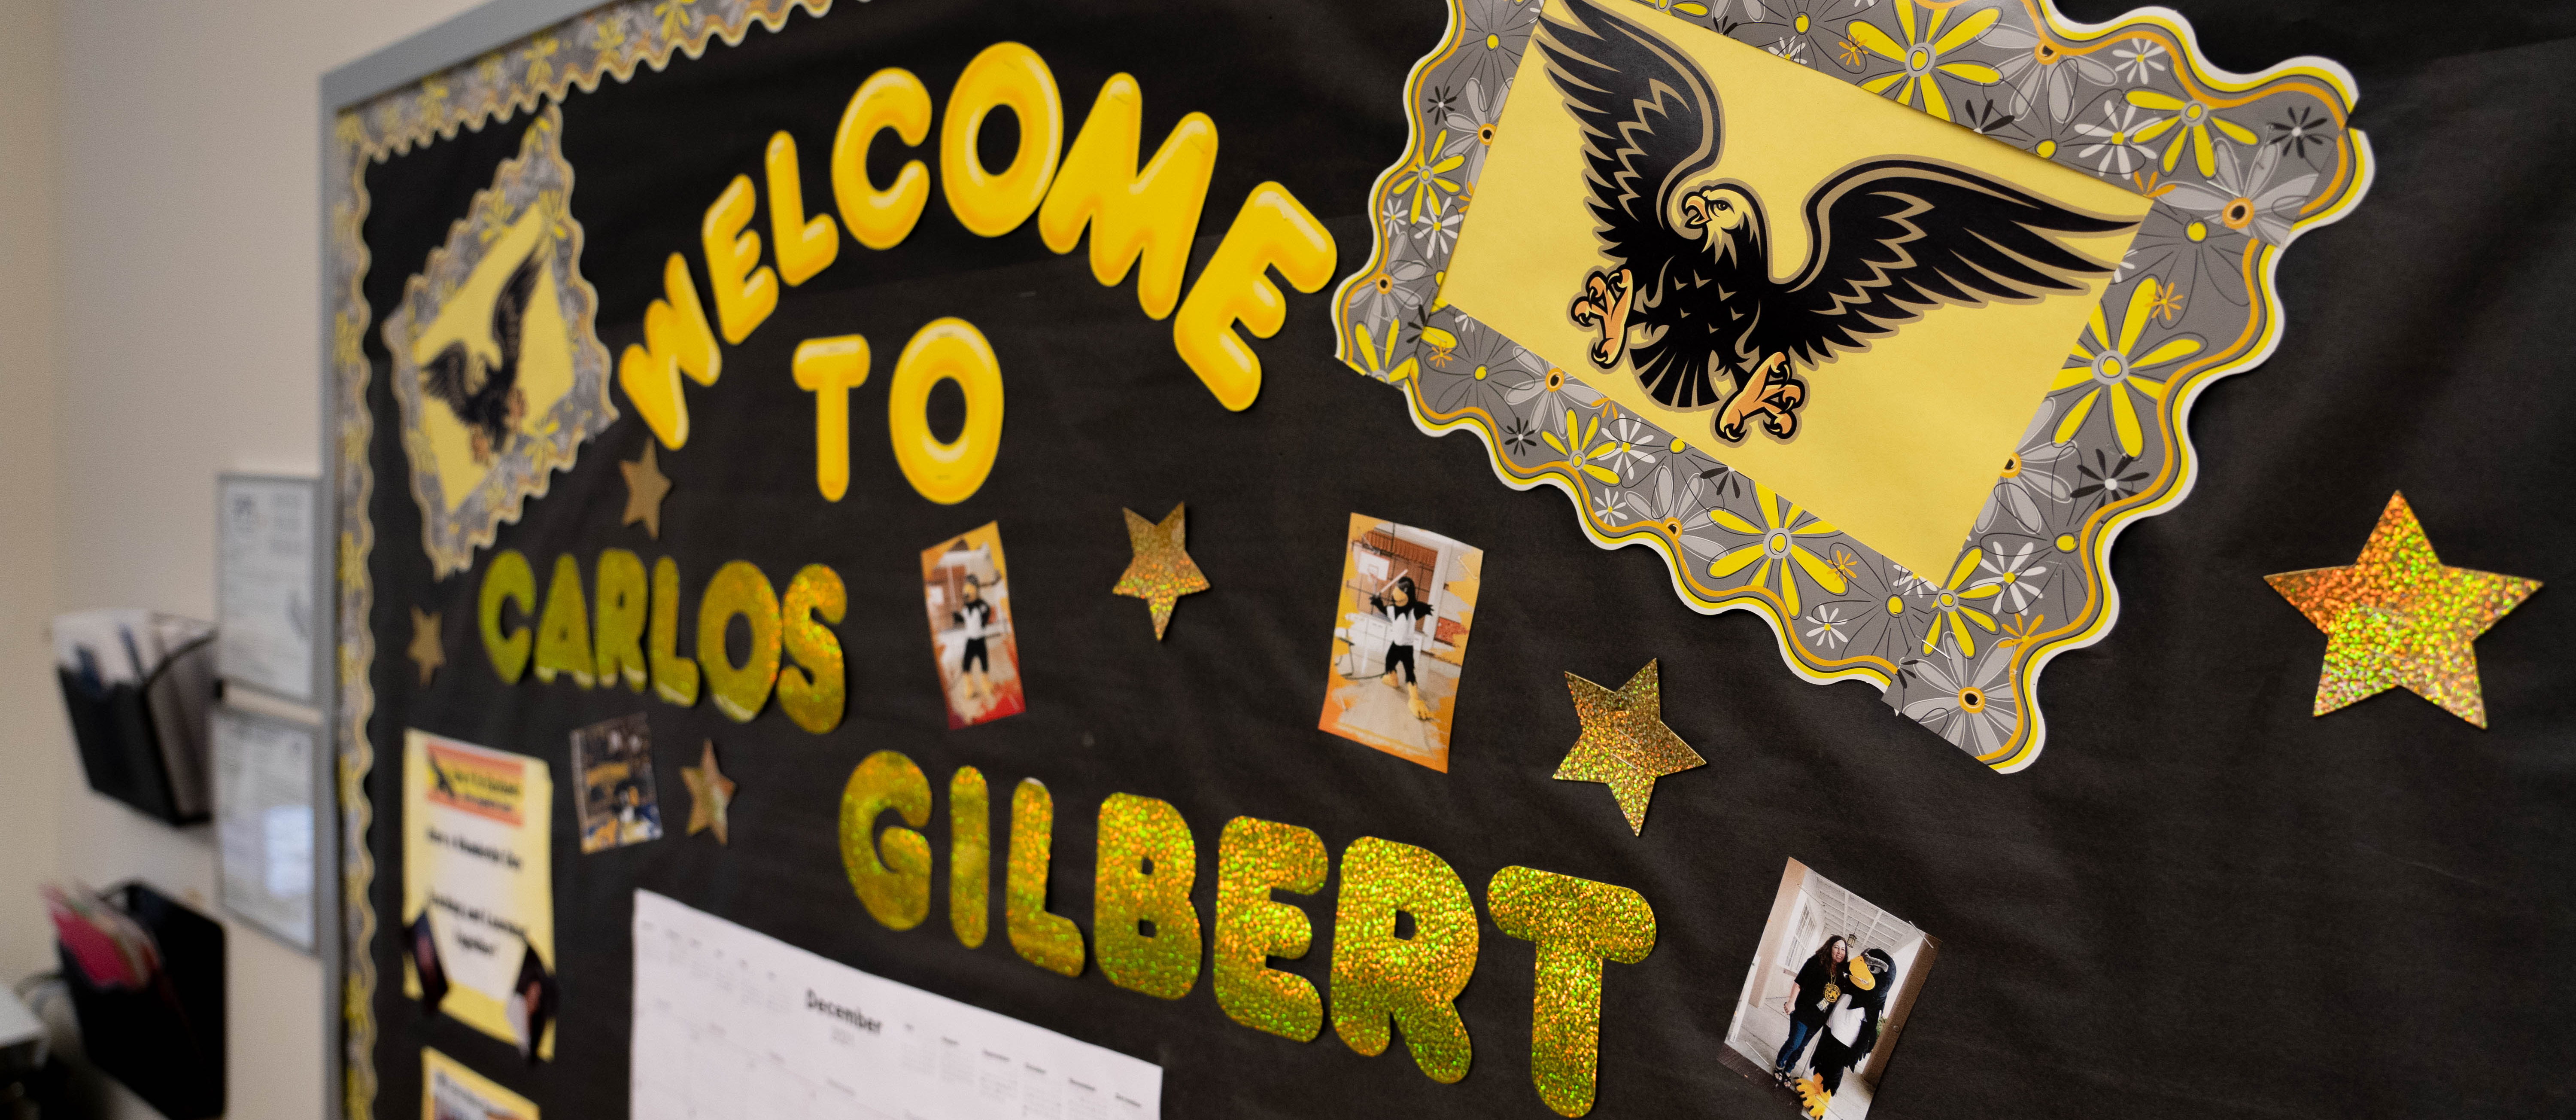 Welcome to Carlos Gilbert sign